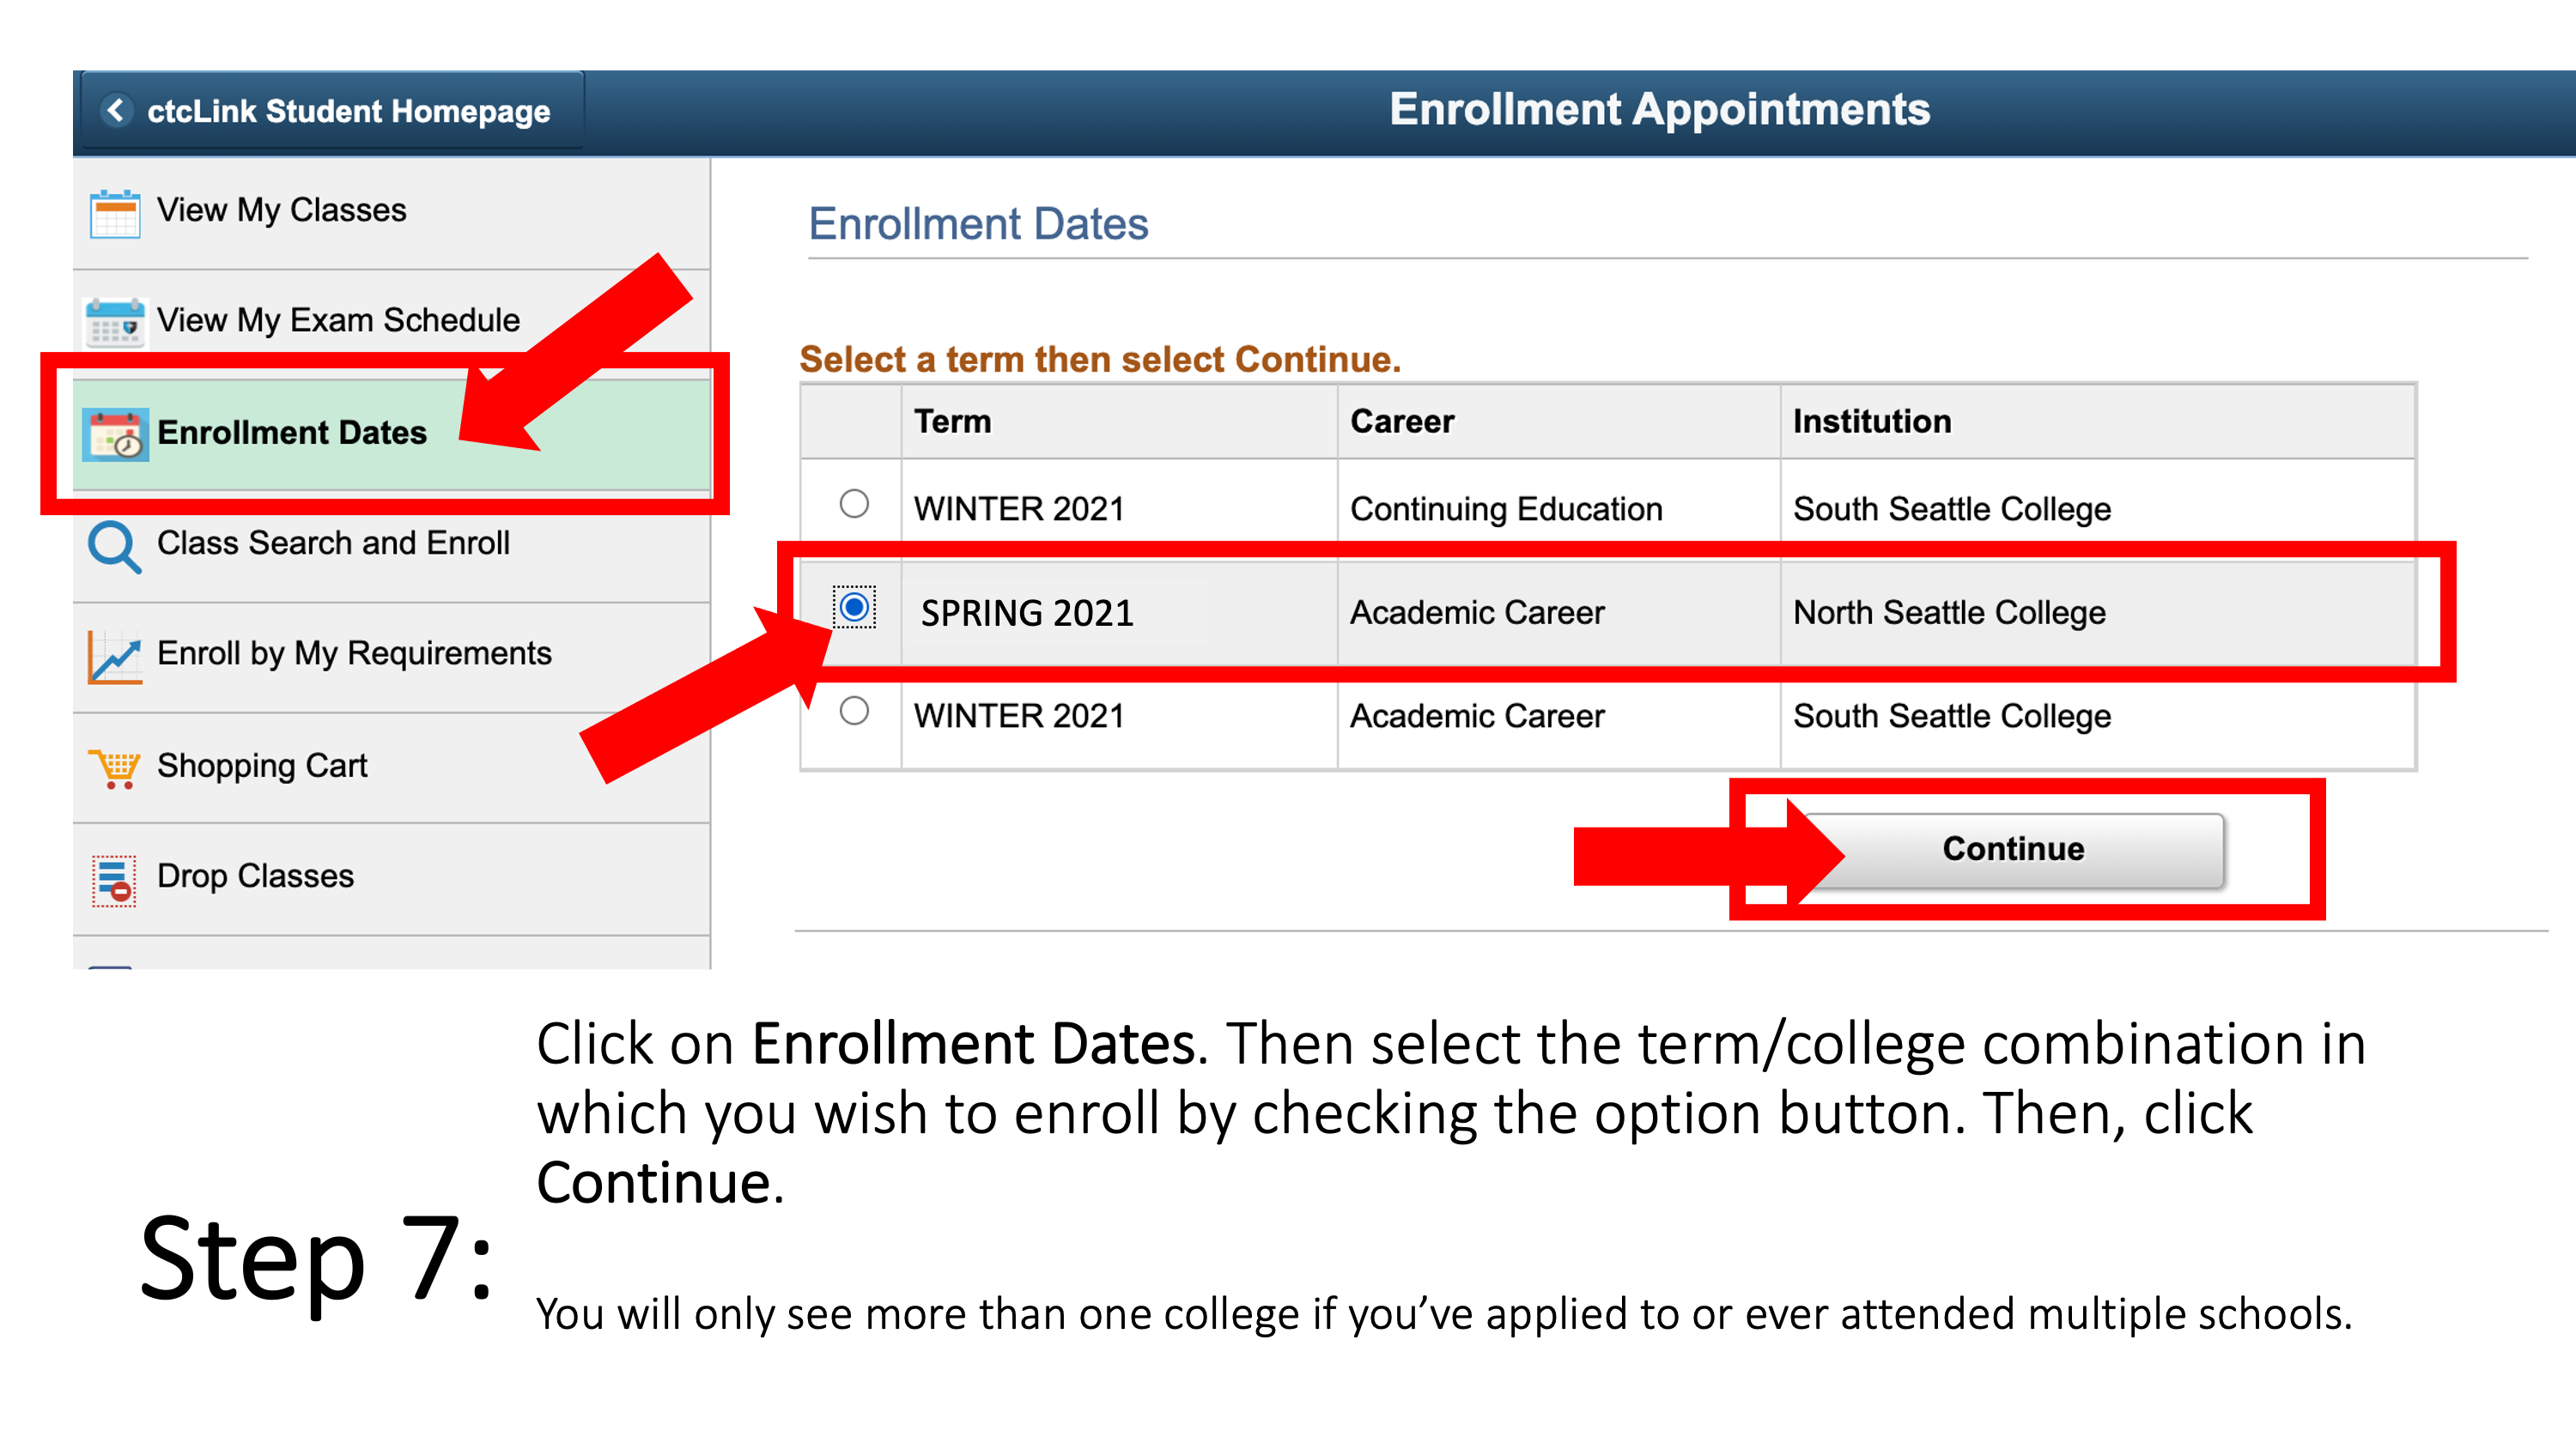 Click on Enrollment Dates. Then select the term/college combination in which you wish to enroll by checking the option button. Then, click Continue. You will only see more than one college if you’ve applied to or ever attended multiple schools.